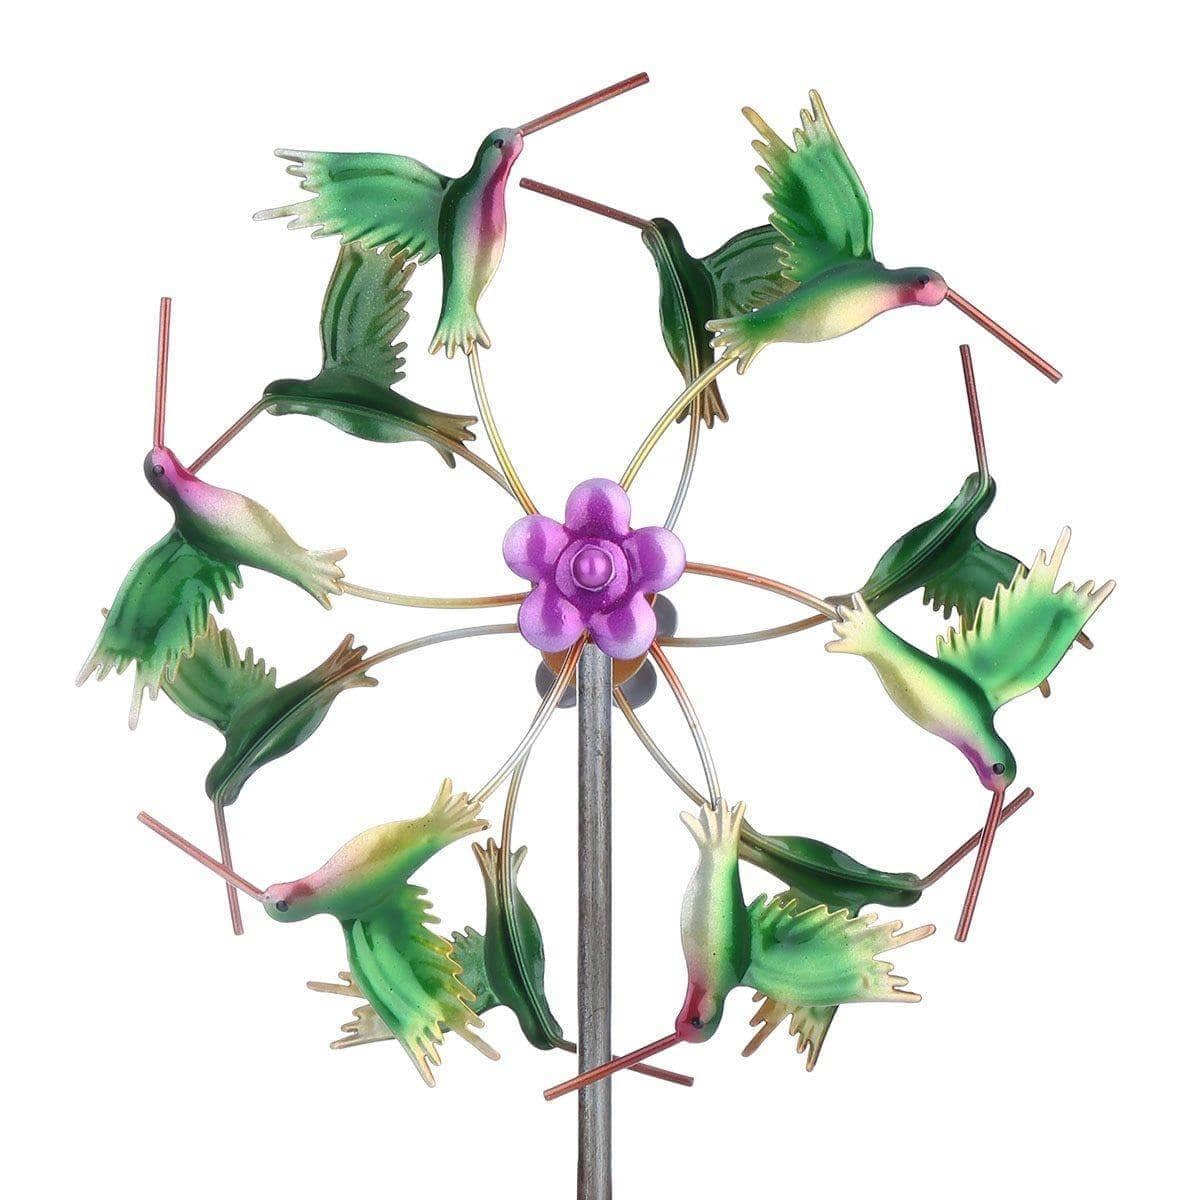 3D Wind Spinner - Stylish Garden Decoration That Watches the Wind Spin